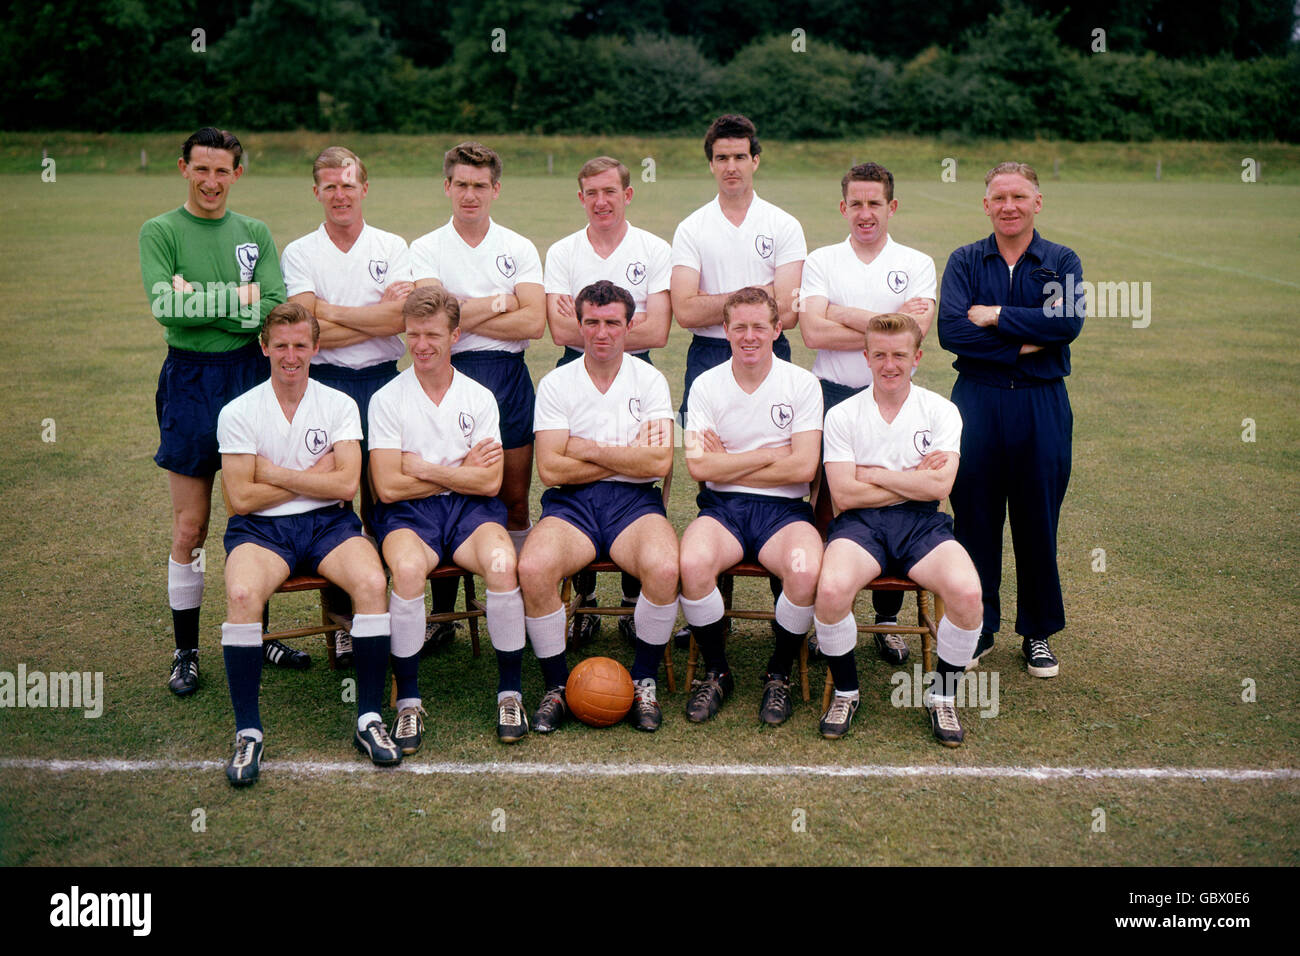 Tottenham Hotspur team group: (back row, l-r) Bill Brown, Peter Baker, Ron Henry, Danny Blanchflower, Maurice Norman, Dave Mackay, manager Bill Nicholson; (front row, l-r) Cliff Jones, John White, Bobby Smith, Les Allen, Terry Dyson Stock Photo